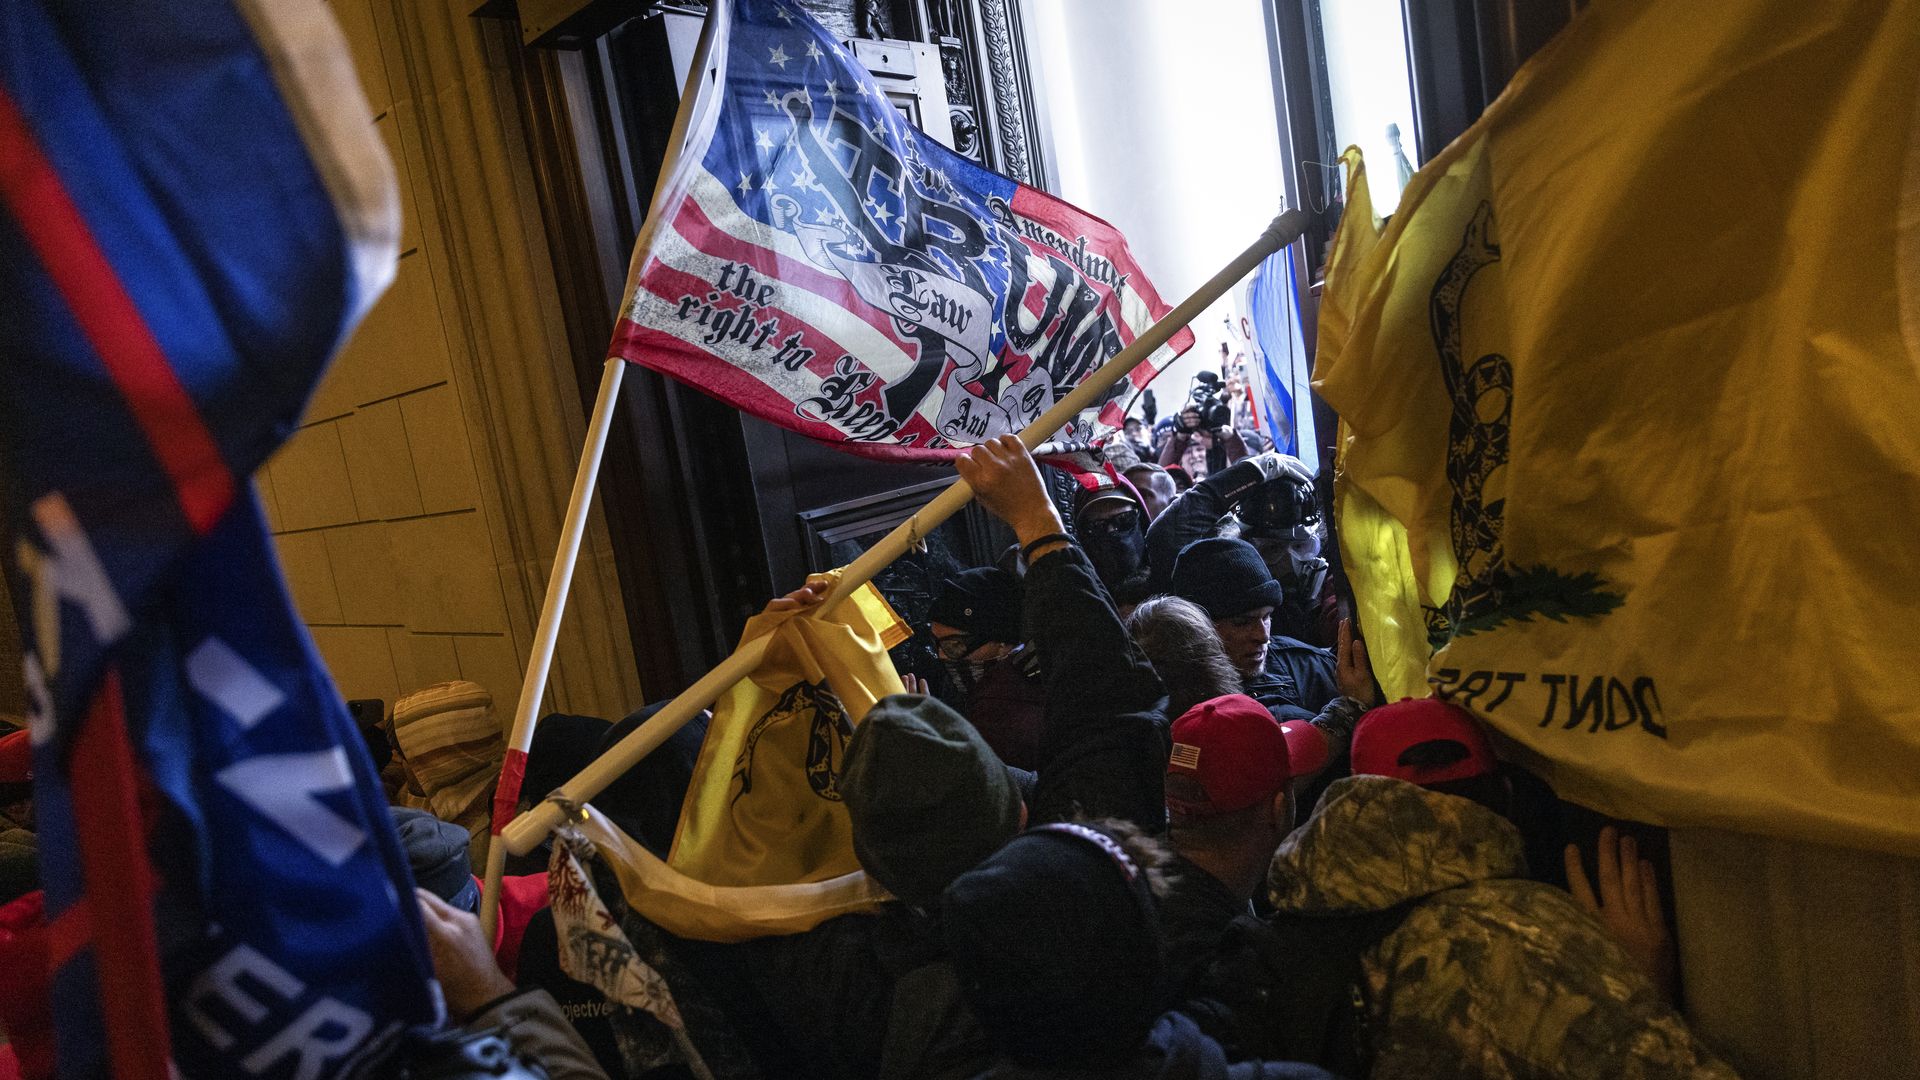 Photo of people storming the Capitol with flags and signs